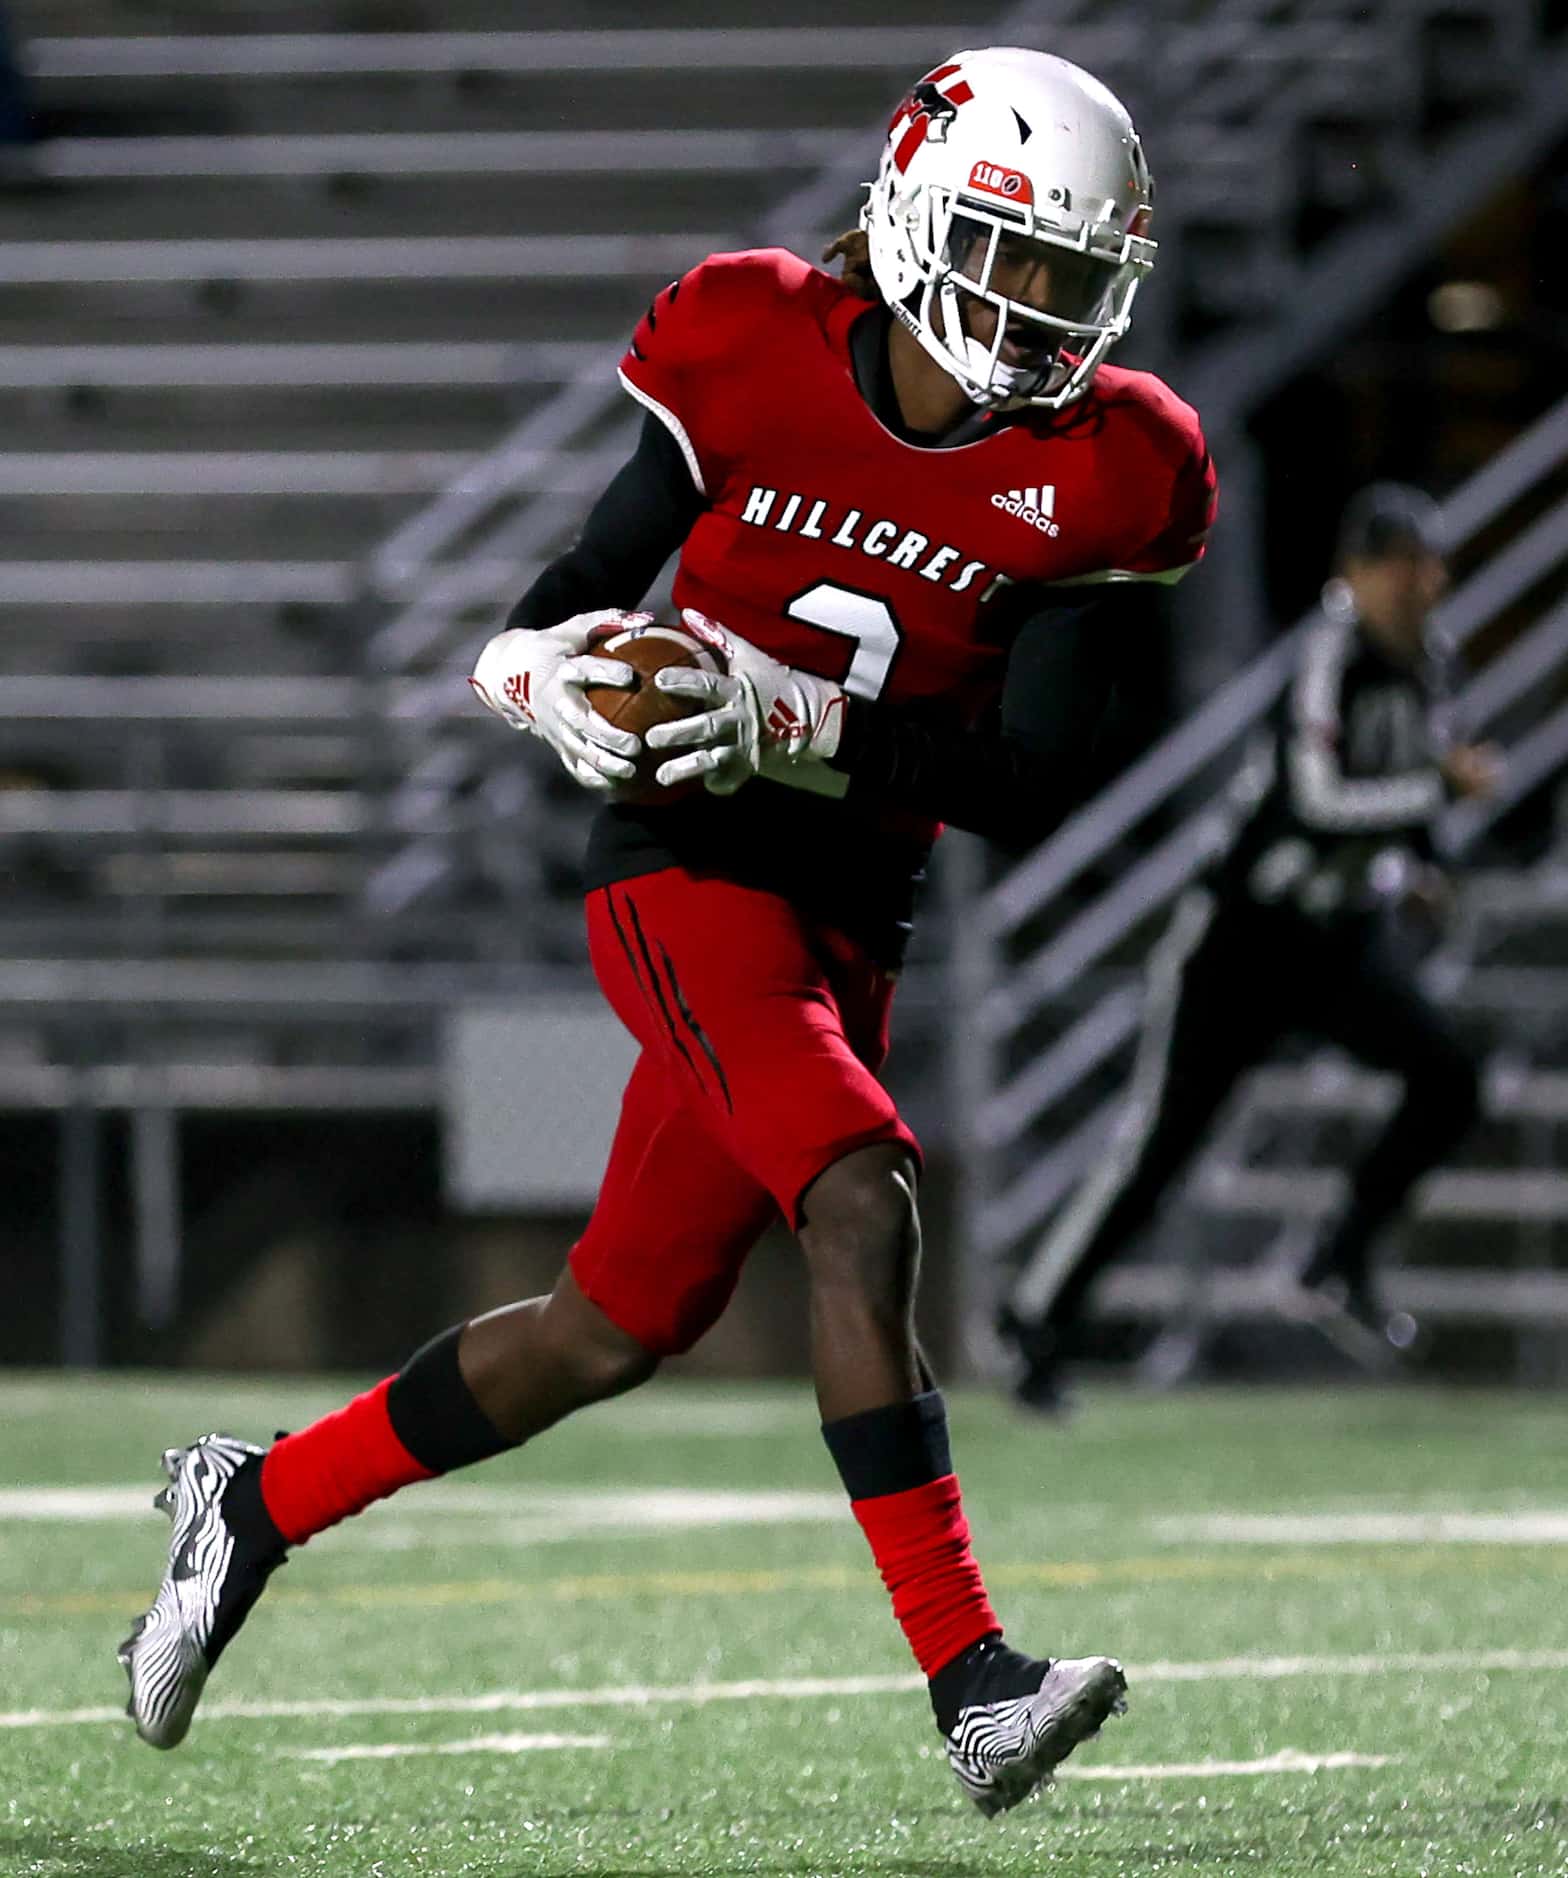 Hillcrest running back Reggie Williams comes up with a 23 yard touchdown reception against...